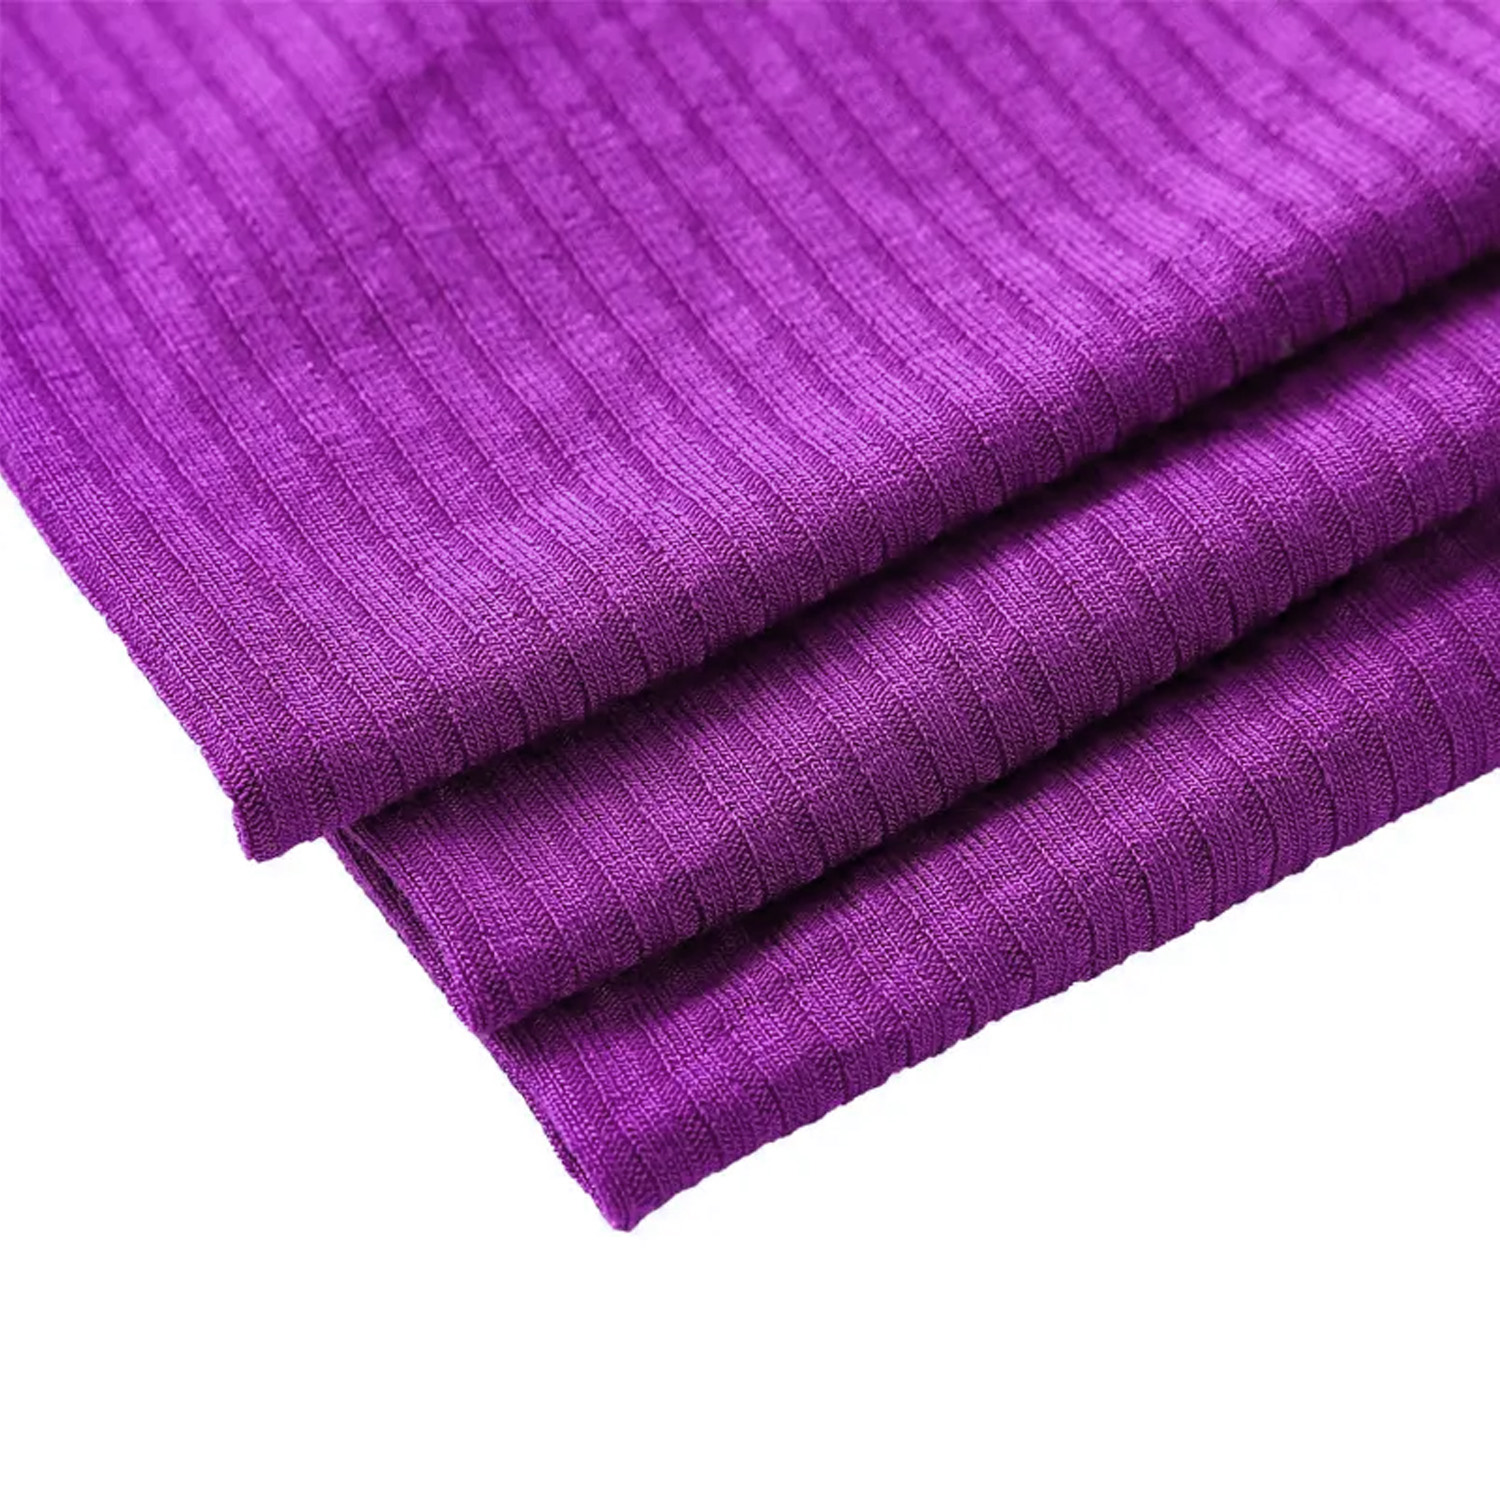 95 Polyester 5 Spandex Knitted Weft Soft Short Sleeve Fabric